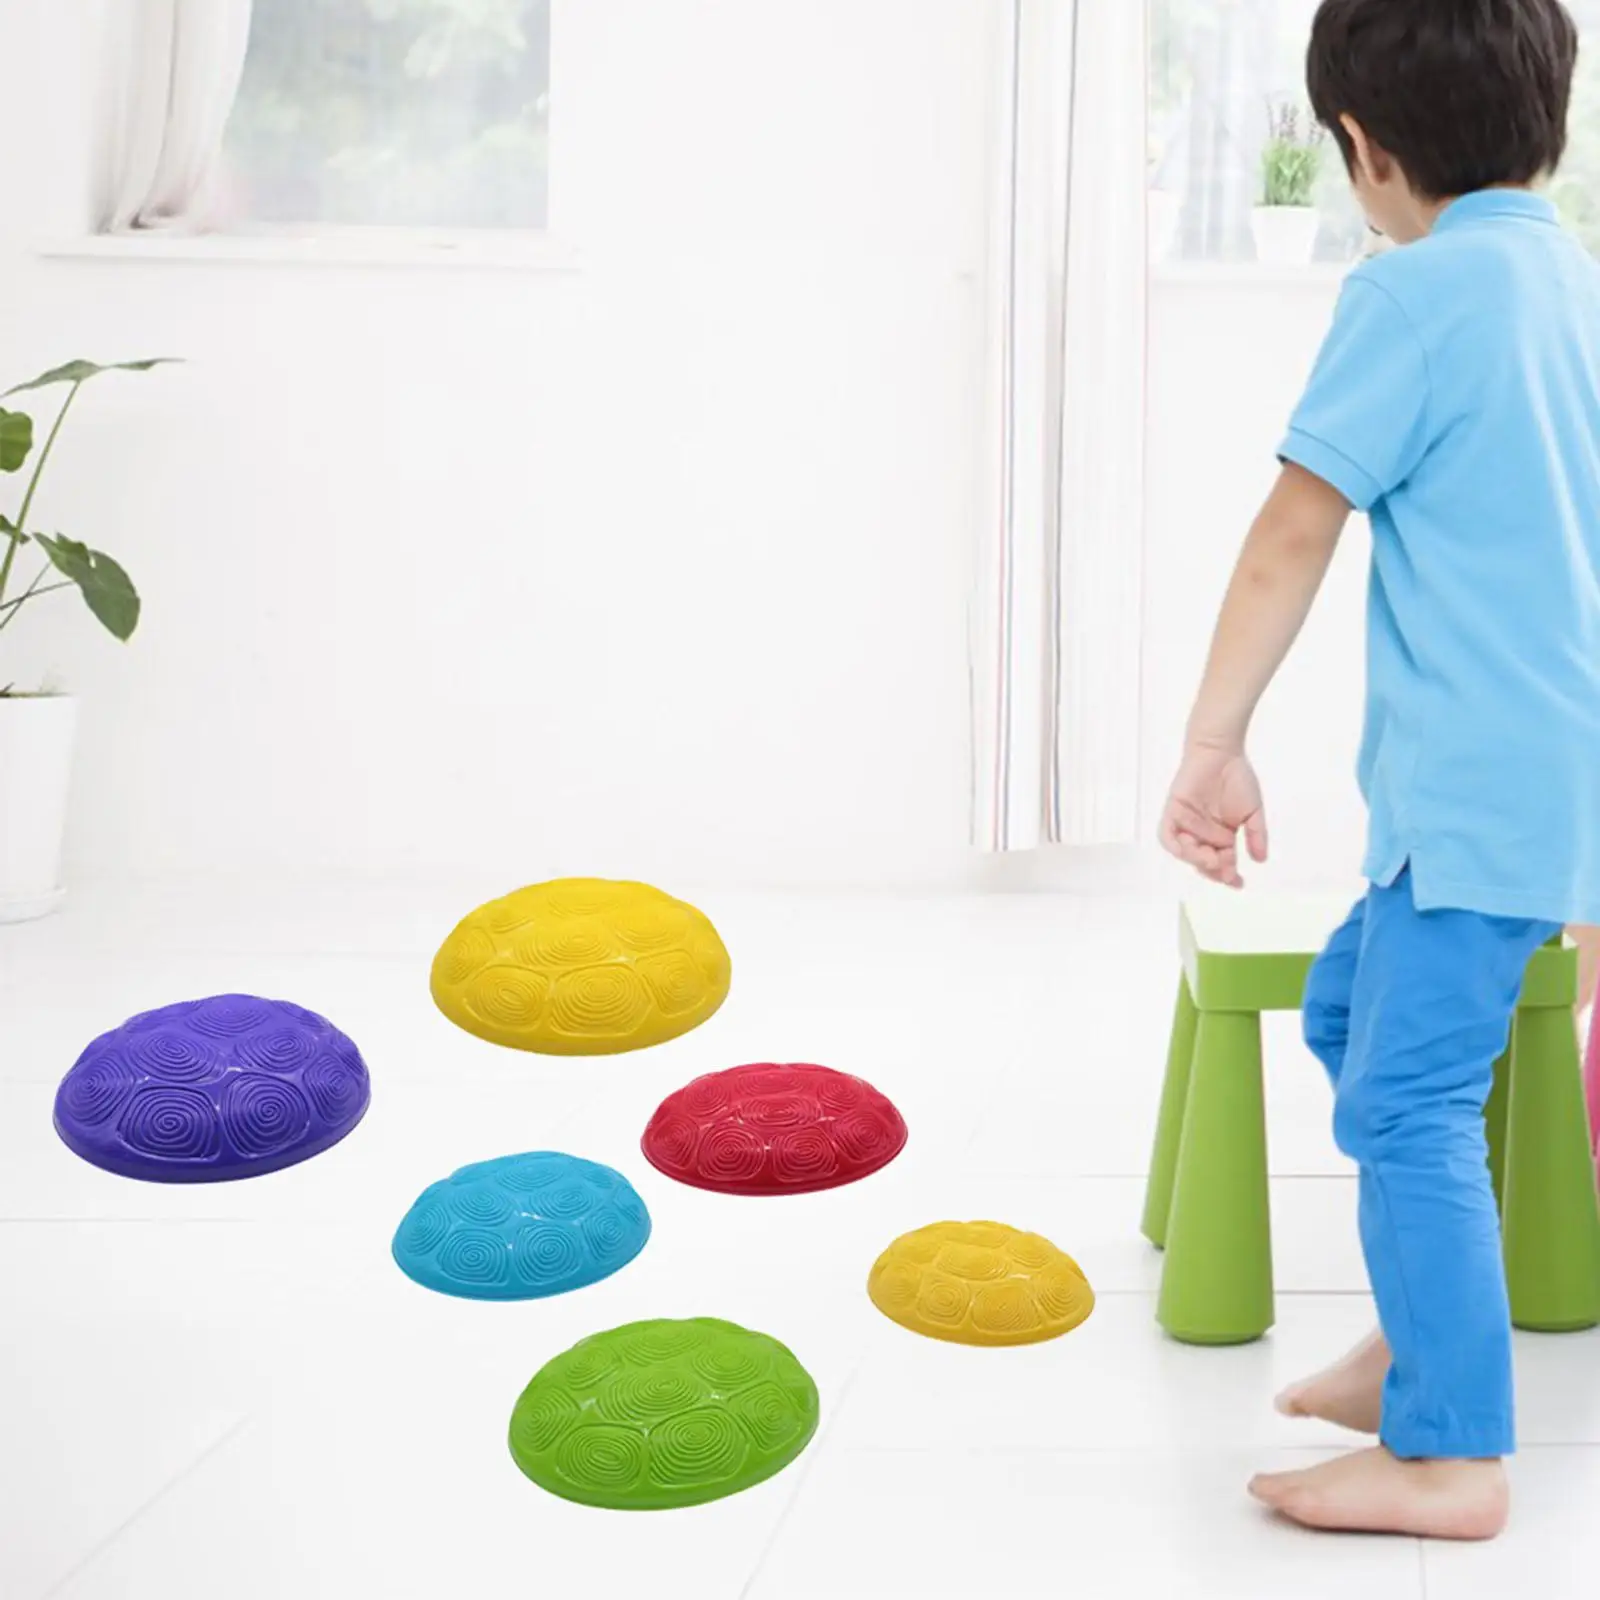 6Pcs Balance Stepping stone Coordination Crossing River stone Durable Turtle jump stone Sensory Toys for Indoor Family